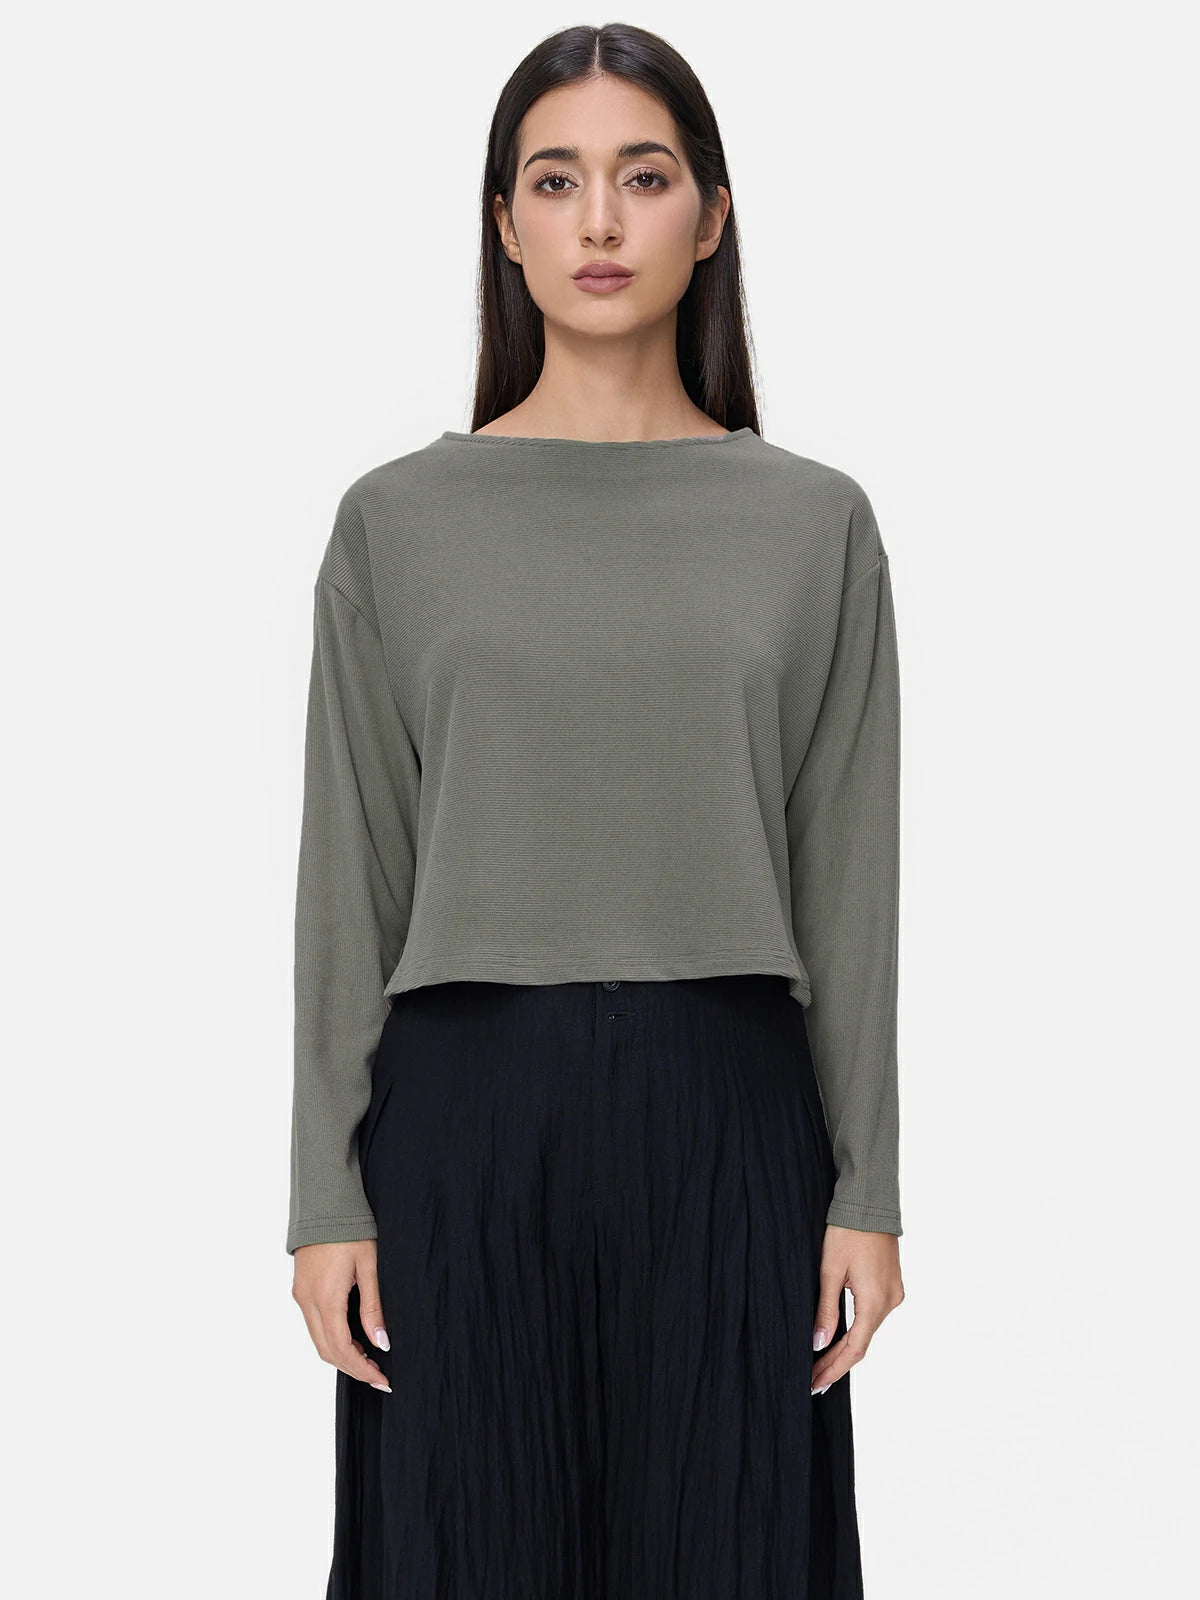 Loose-fitting T-shirt with drop-shoulder sleeves for a relaxed look